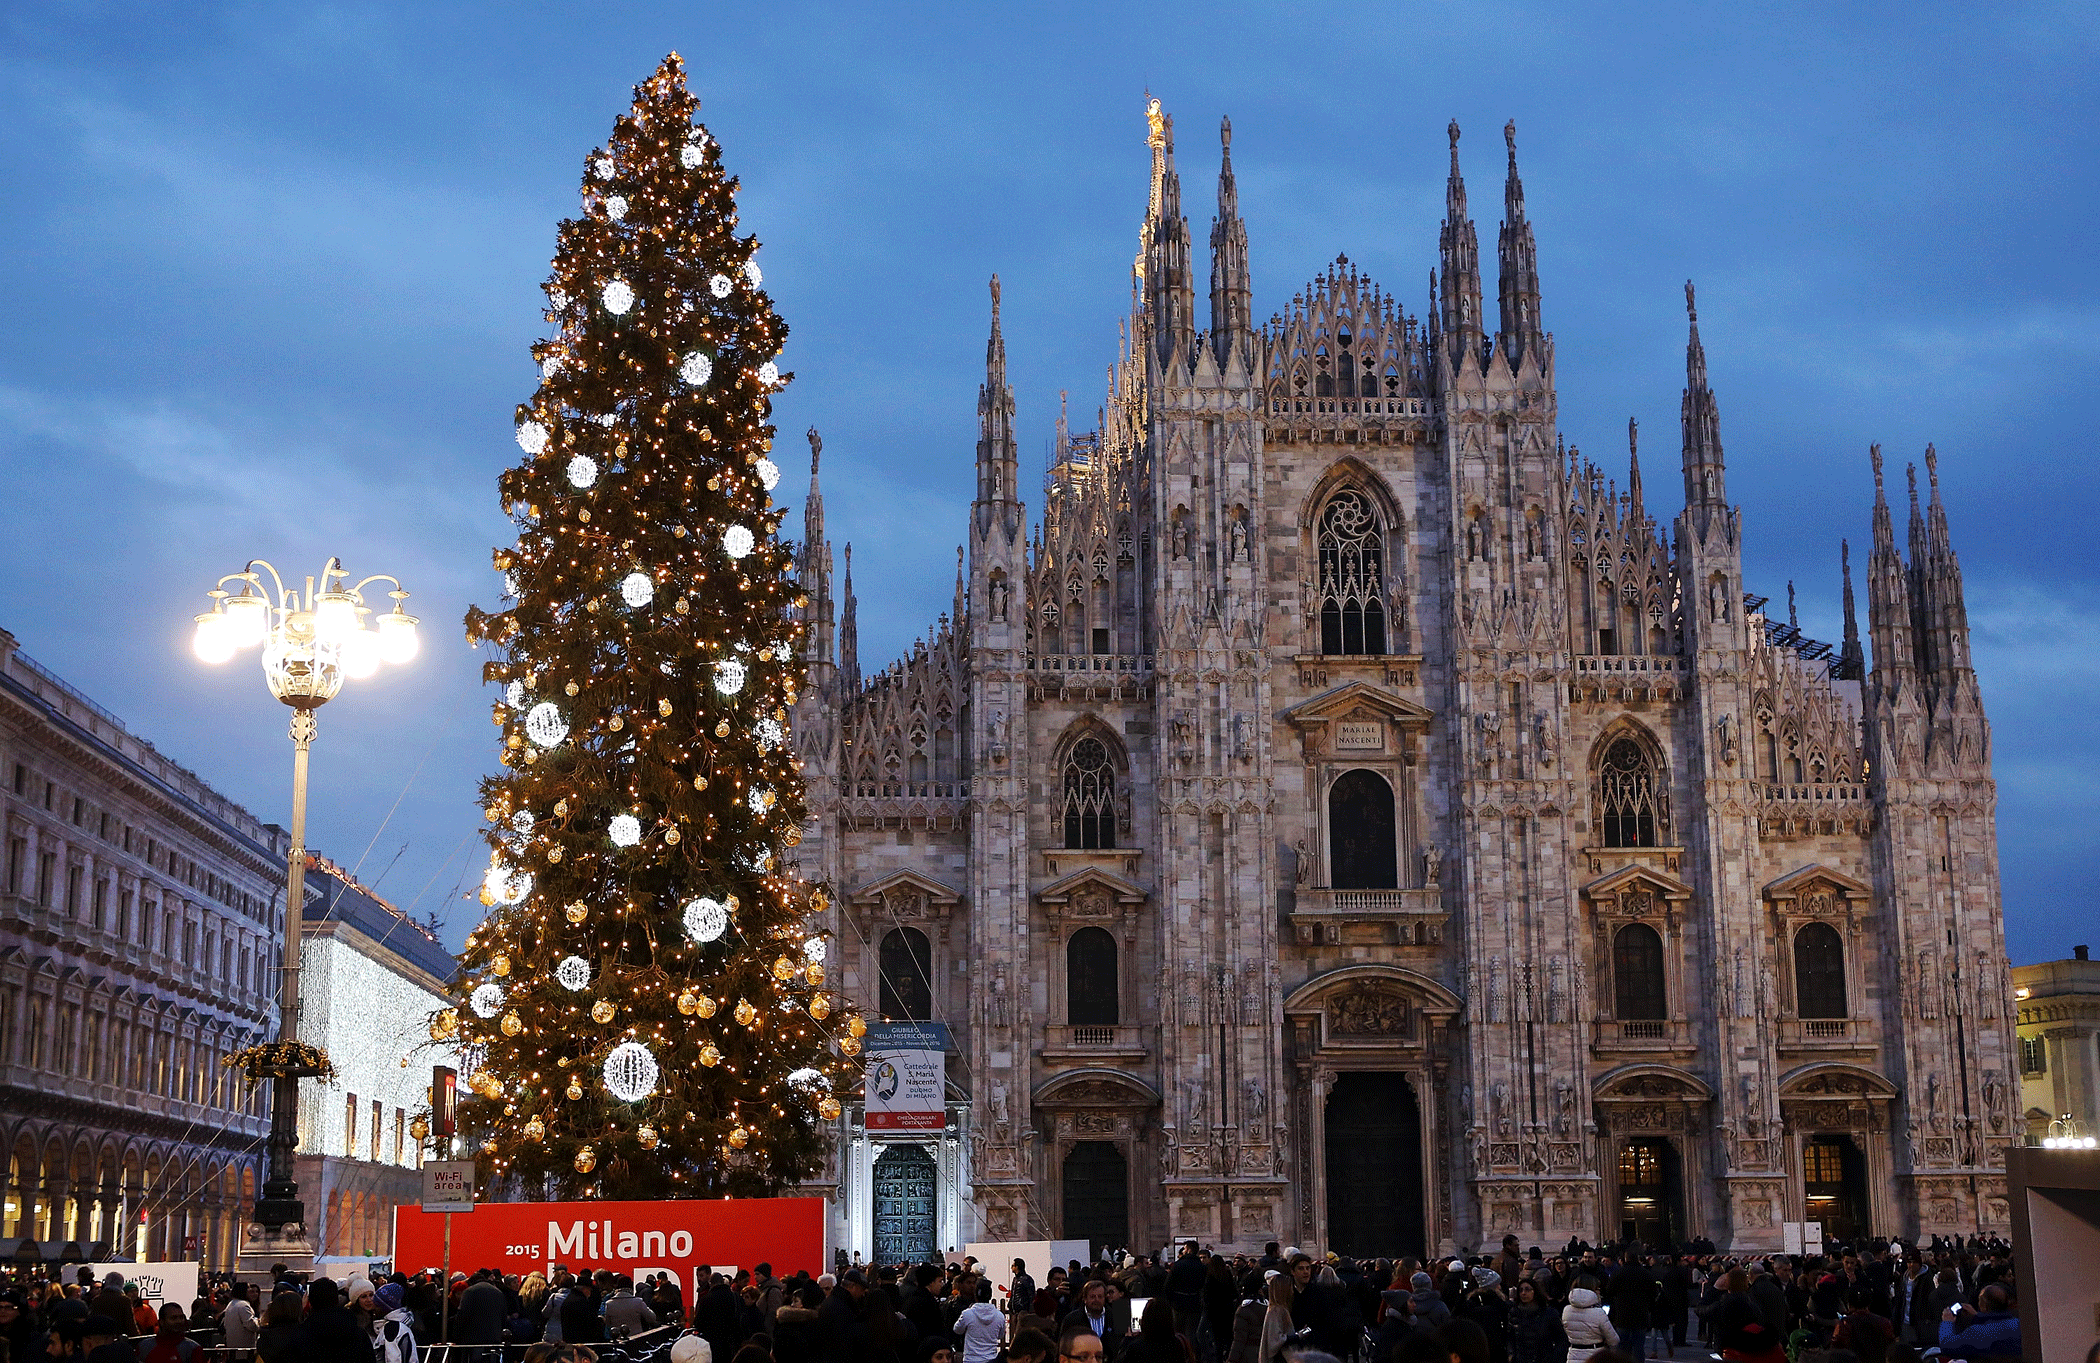 A Christmas tree in Piazza Duomo on Dec. 13, 2015 in Milan.